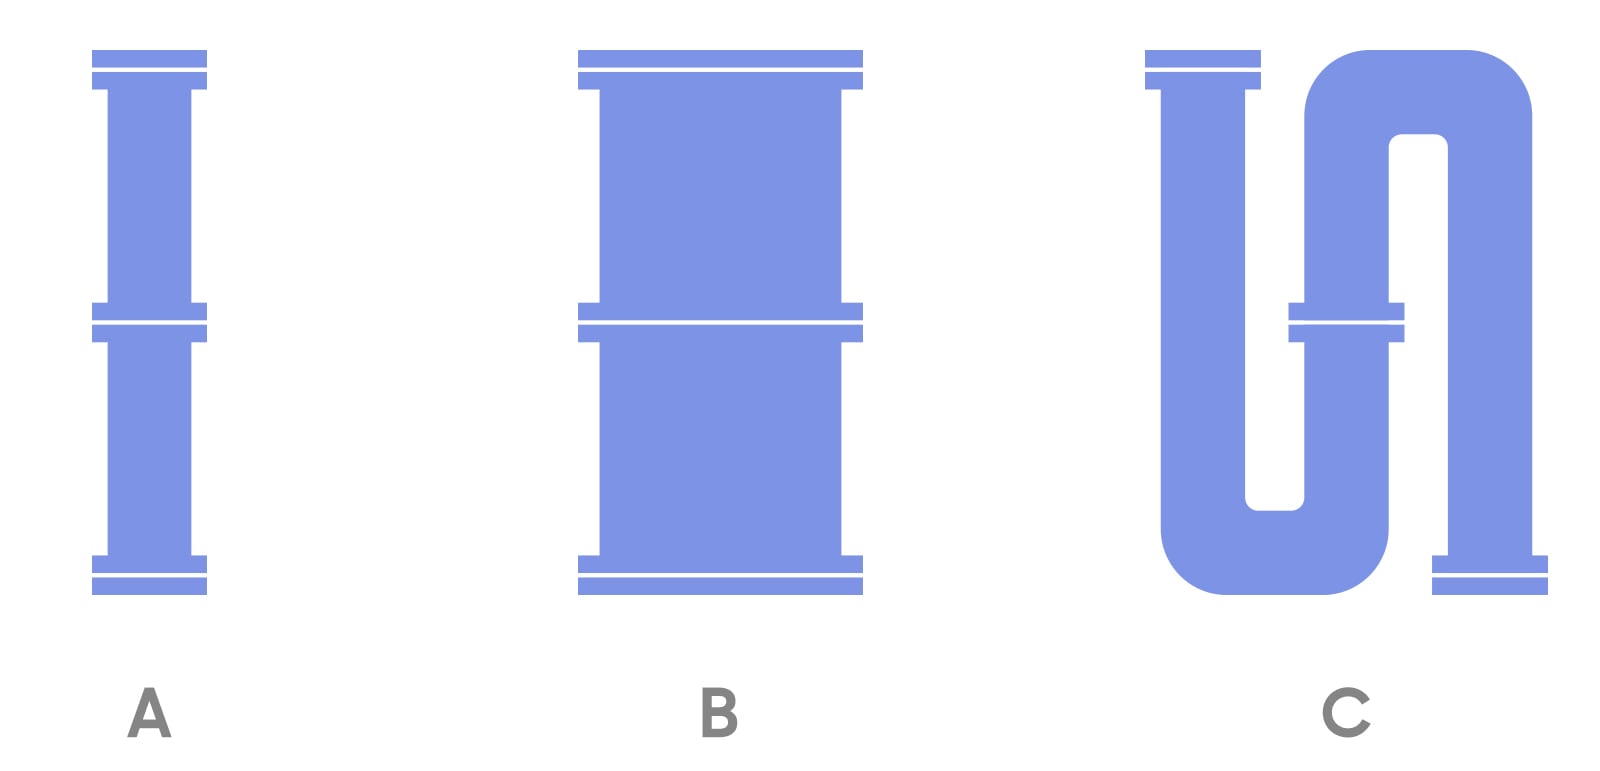 Fig. [6] Comparing resistance to aqueduct (resistance smallest in (b) and largest in (c))